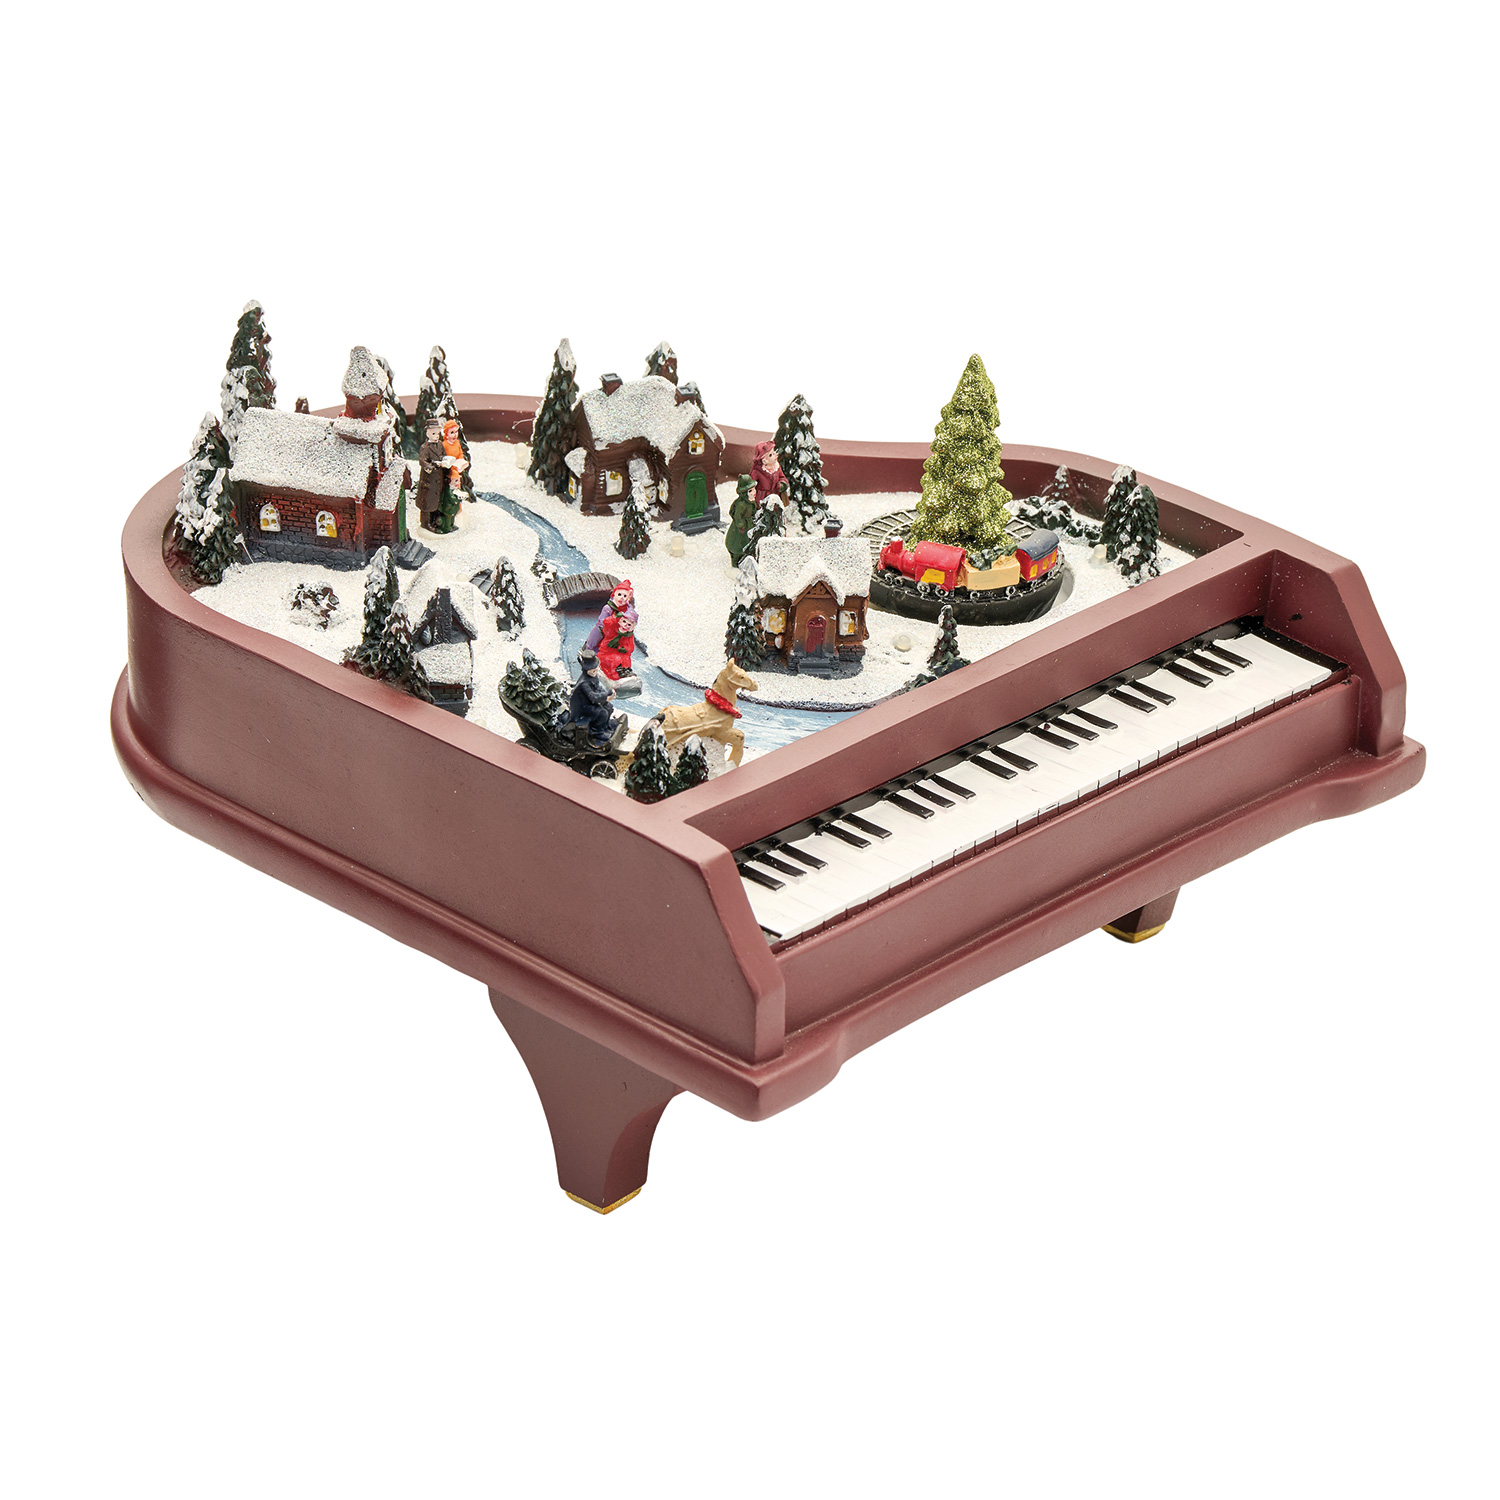 Animated Musical Grand Piano | Shop.PBS.org